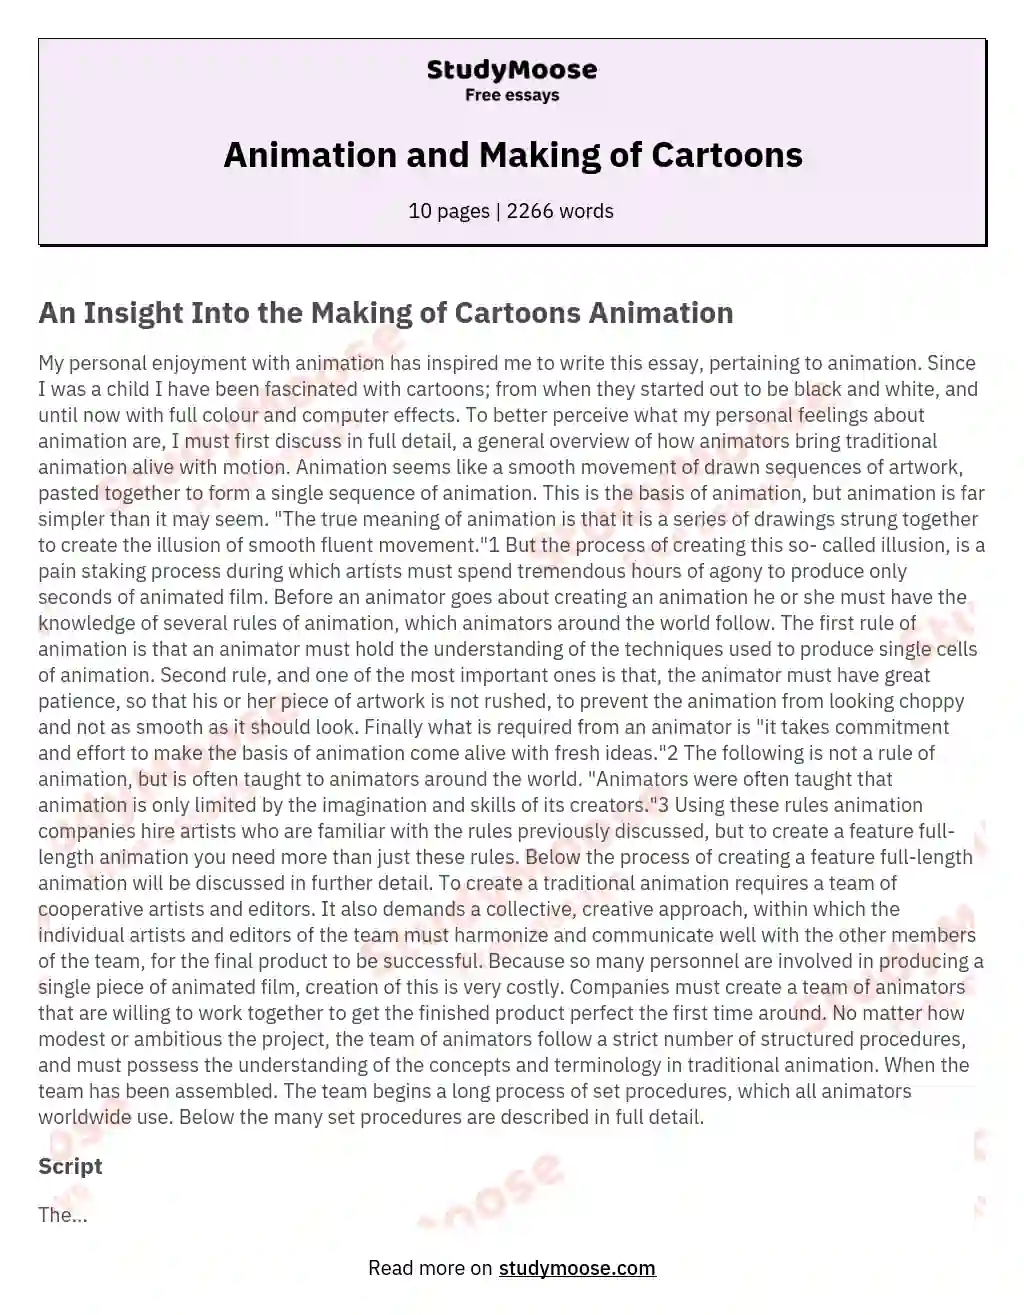 Animation and Making of Cartoons essay